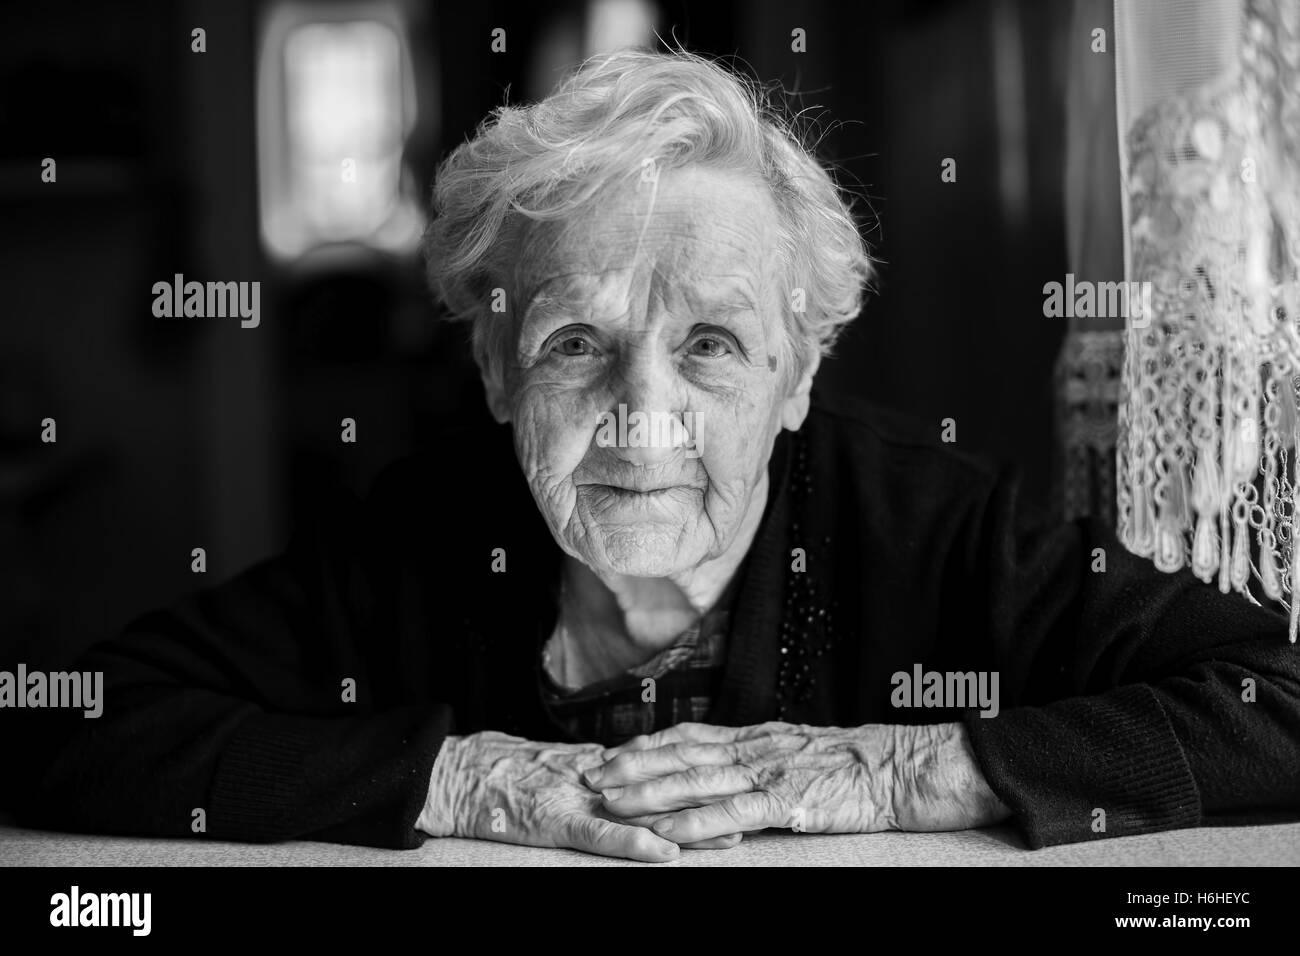 Black and white contrast portrait of an elderly woman. Stock Photo